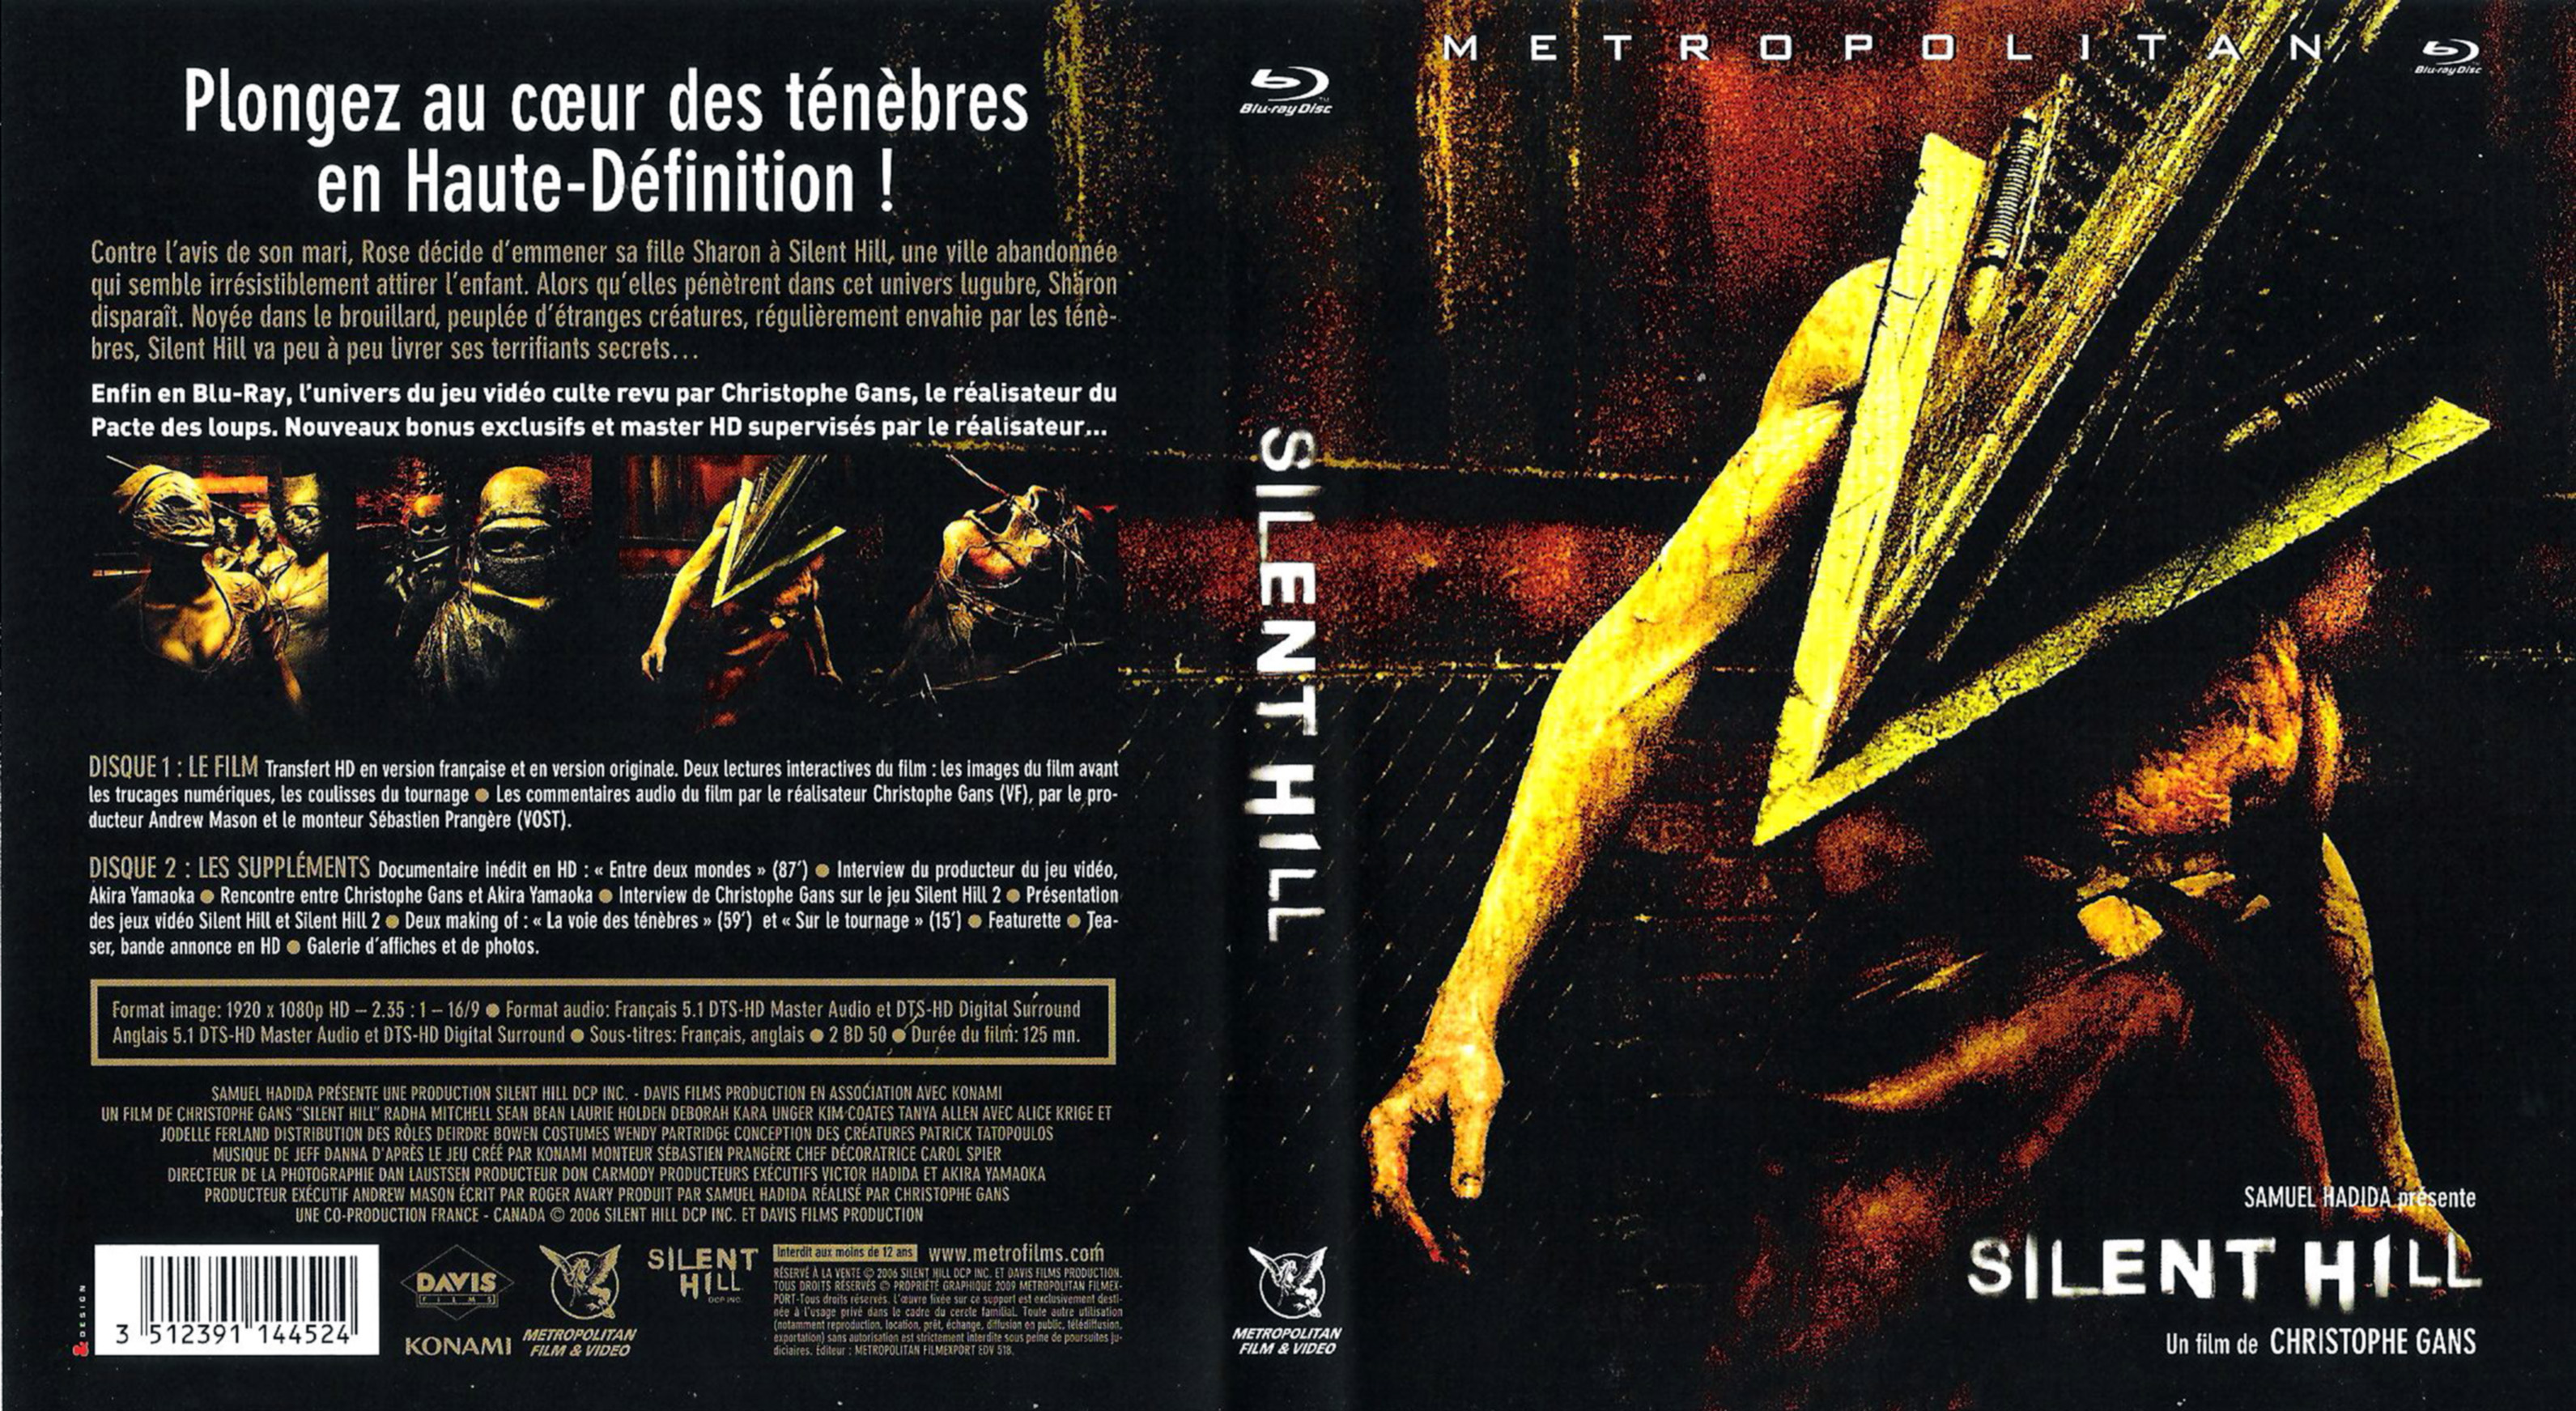 Jaquette DVD Silent Hill (BLU-RAY)